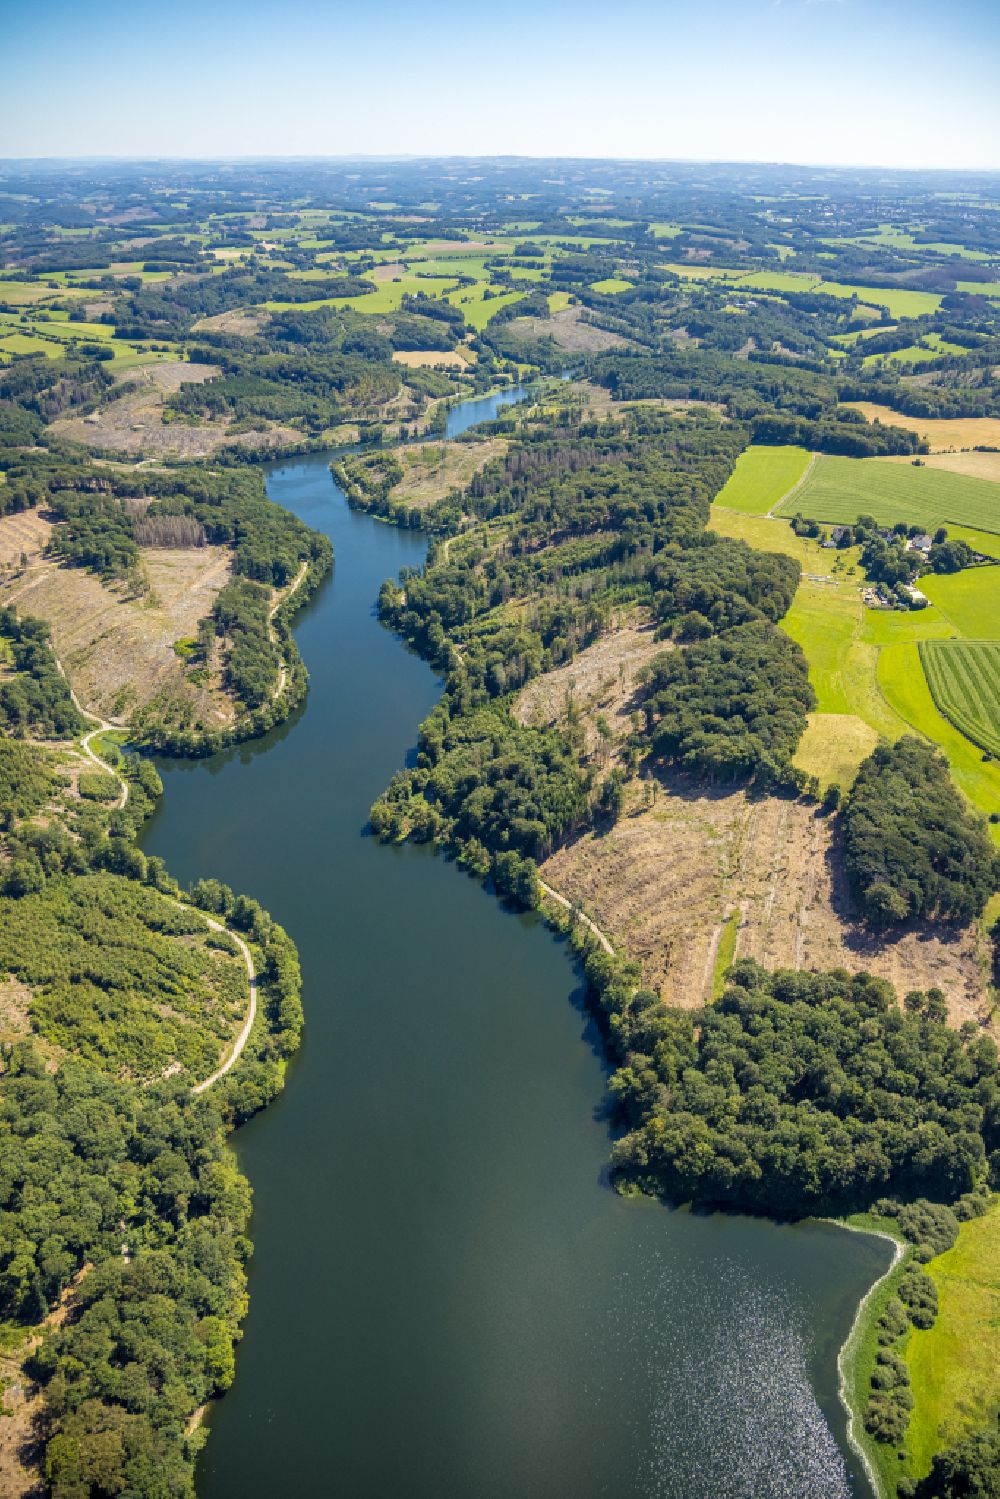 Breckerfeld from above - dam and shore areas at the lake Ennepetalsperre in Breckerfeld in the state North Rhine-Westphalia, Germany